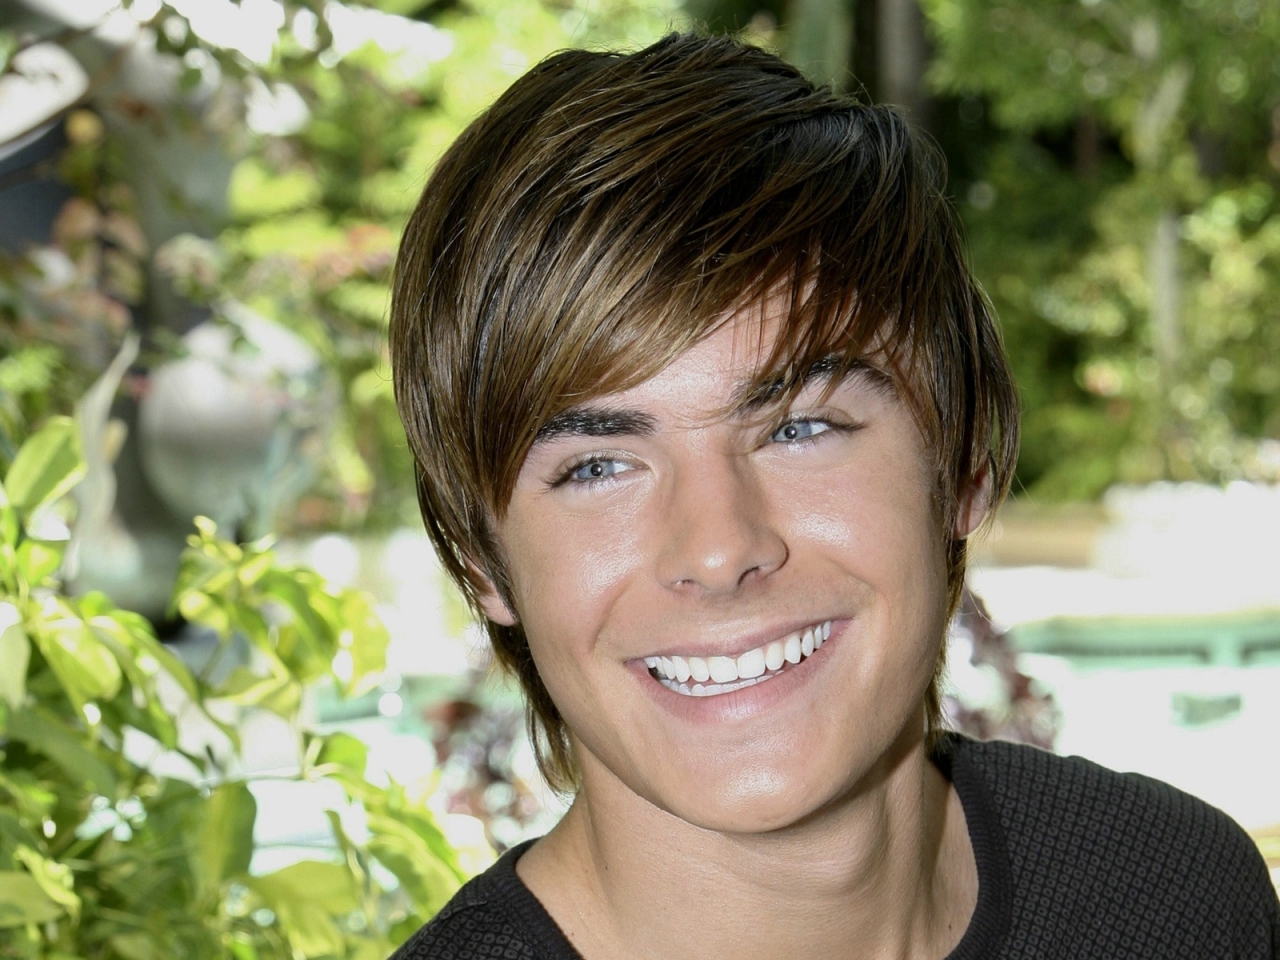 Zac Efron Smile for 1280 x 960 resolution